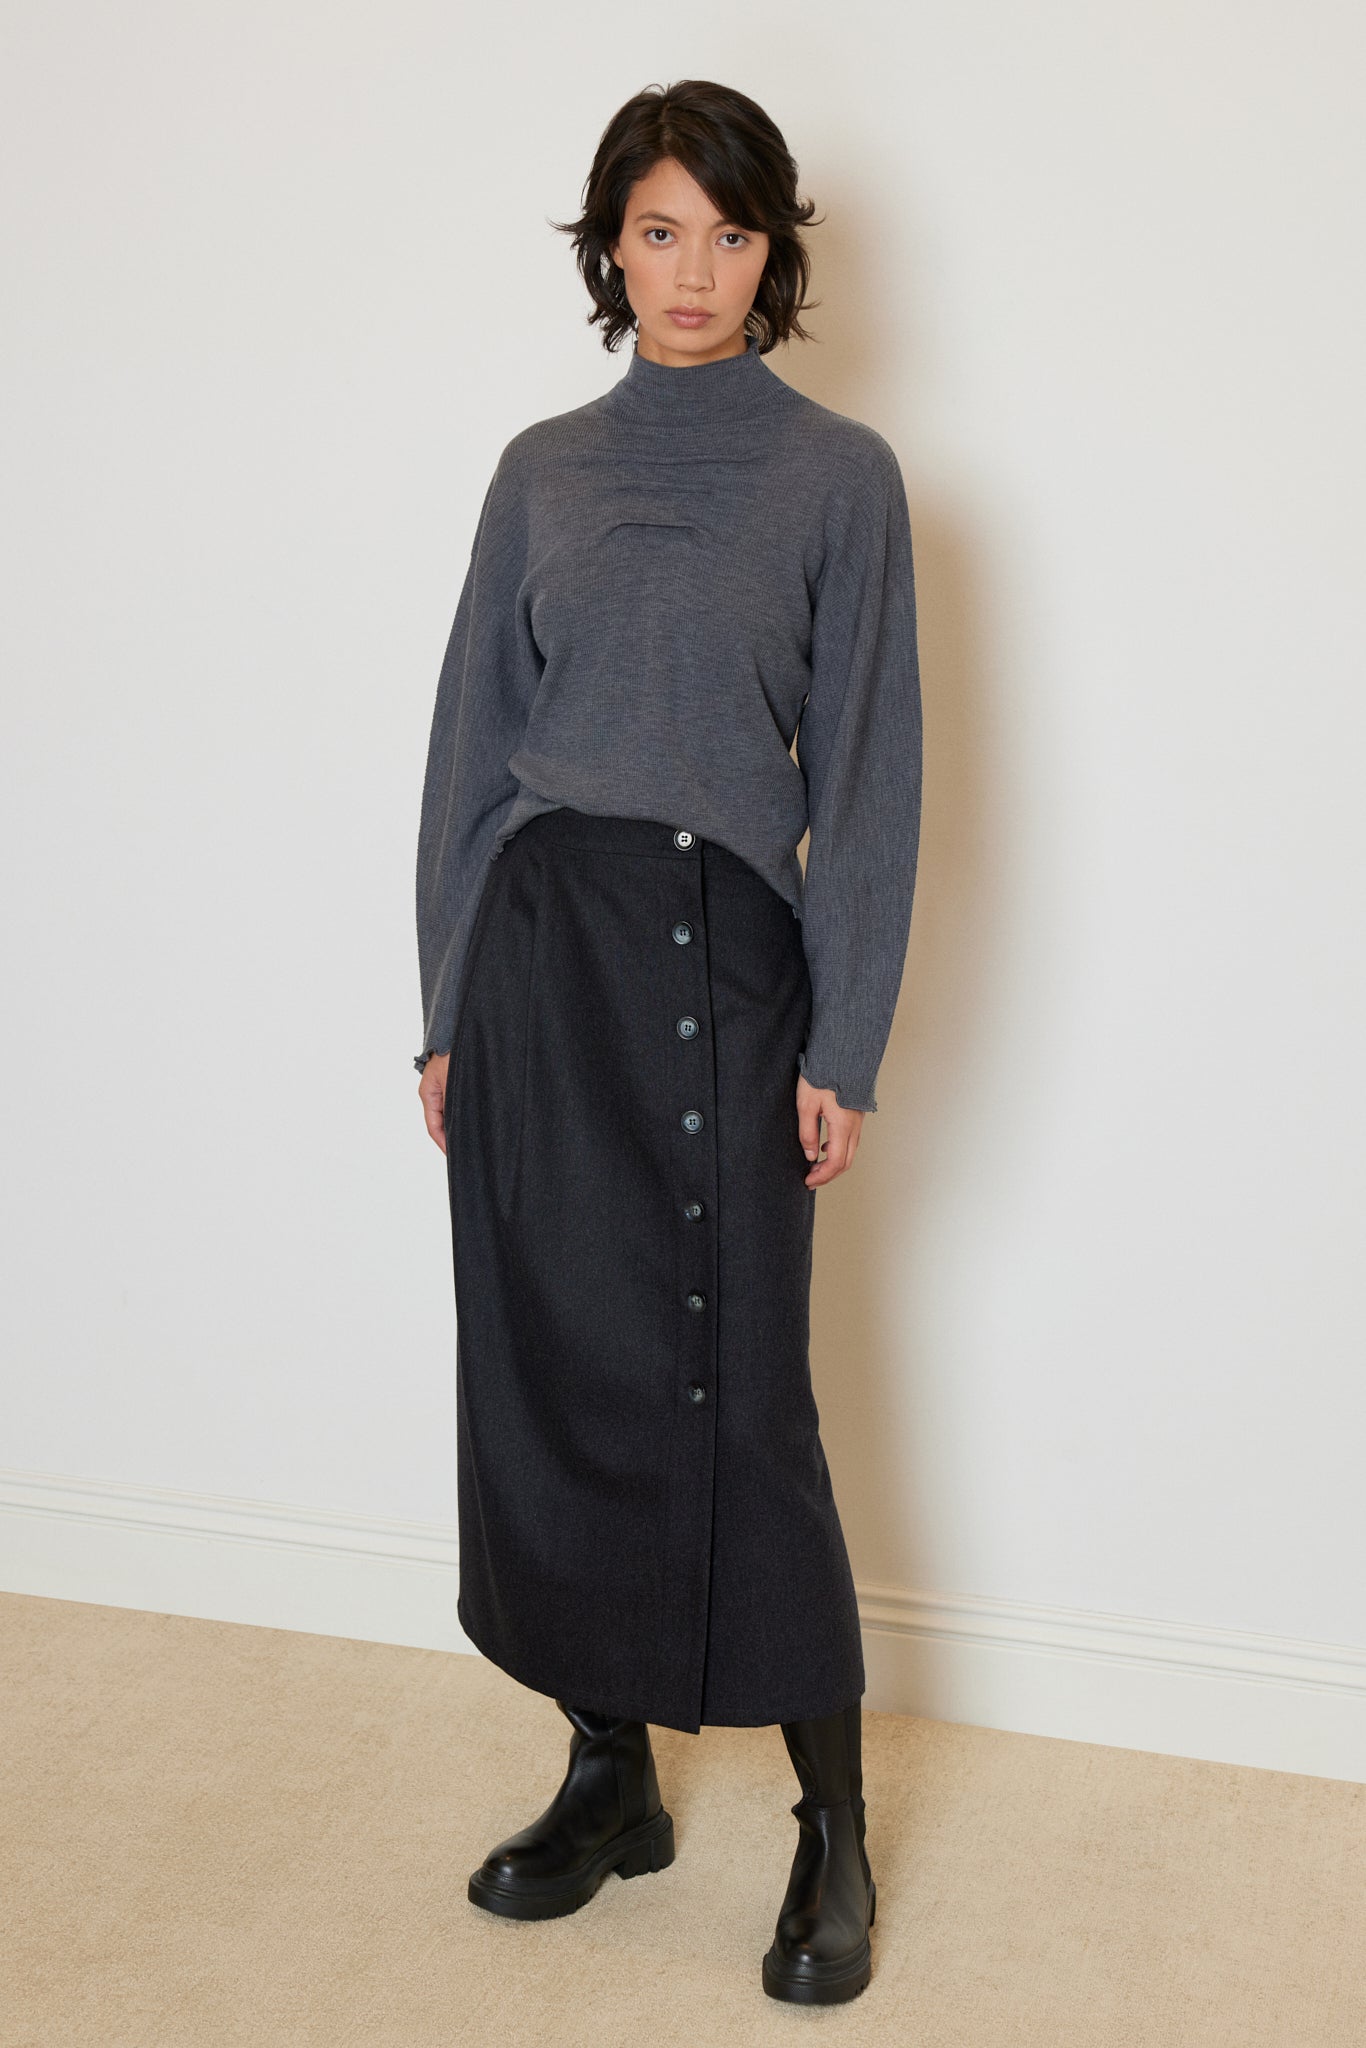 Wool and Cashmere Midi Skirt